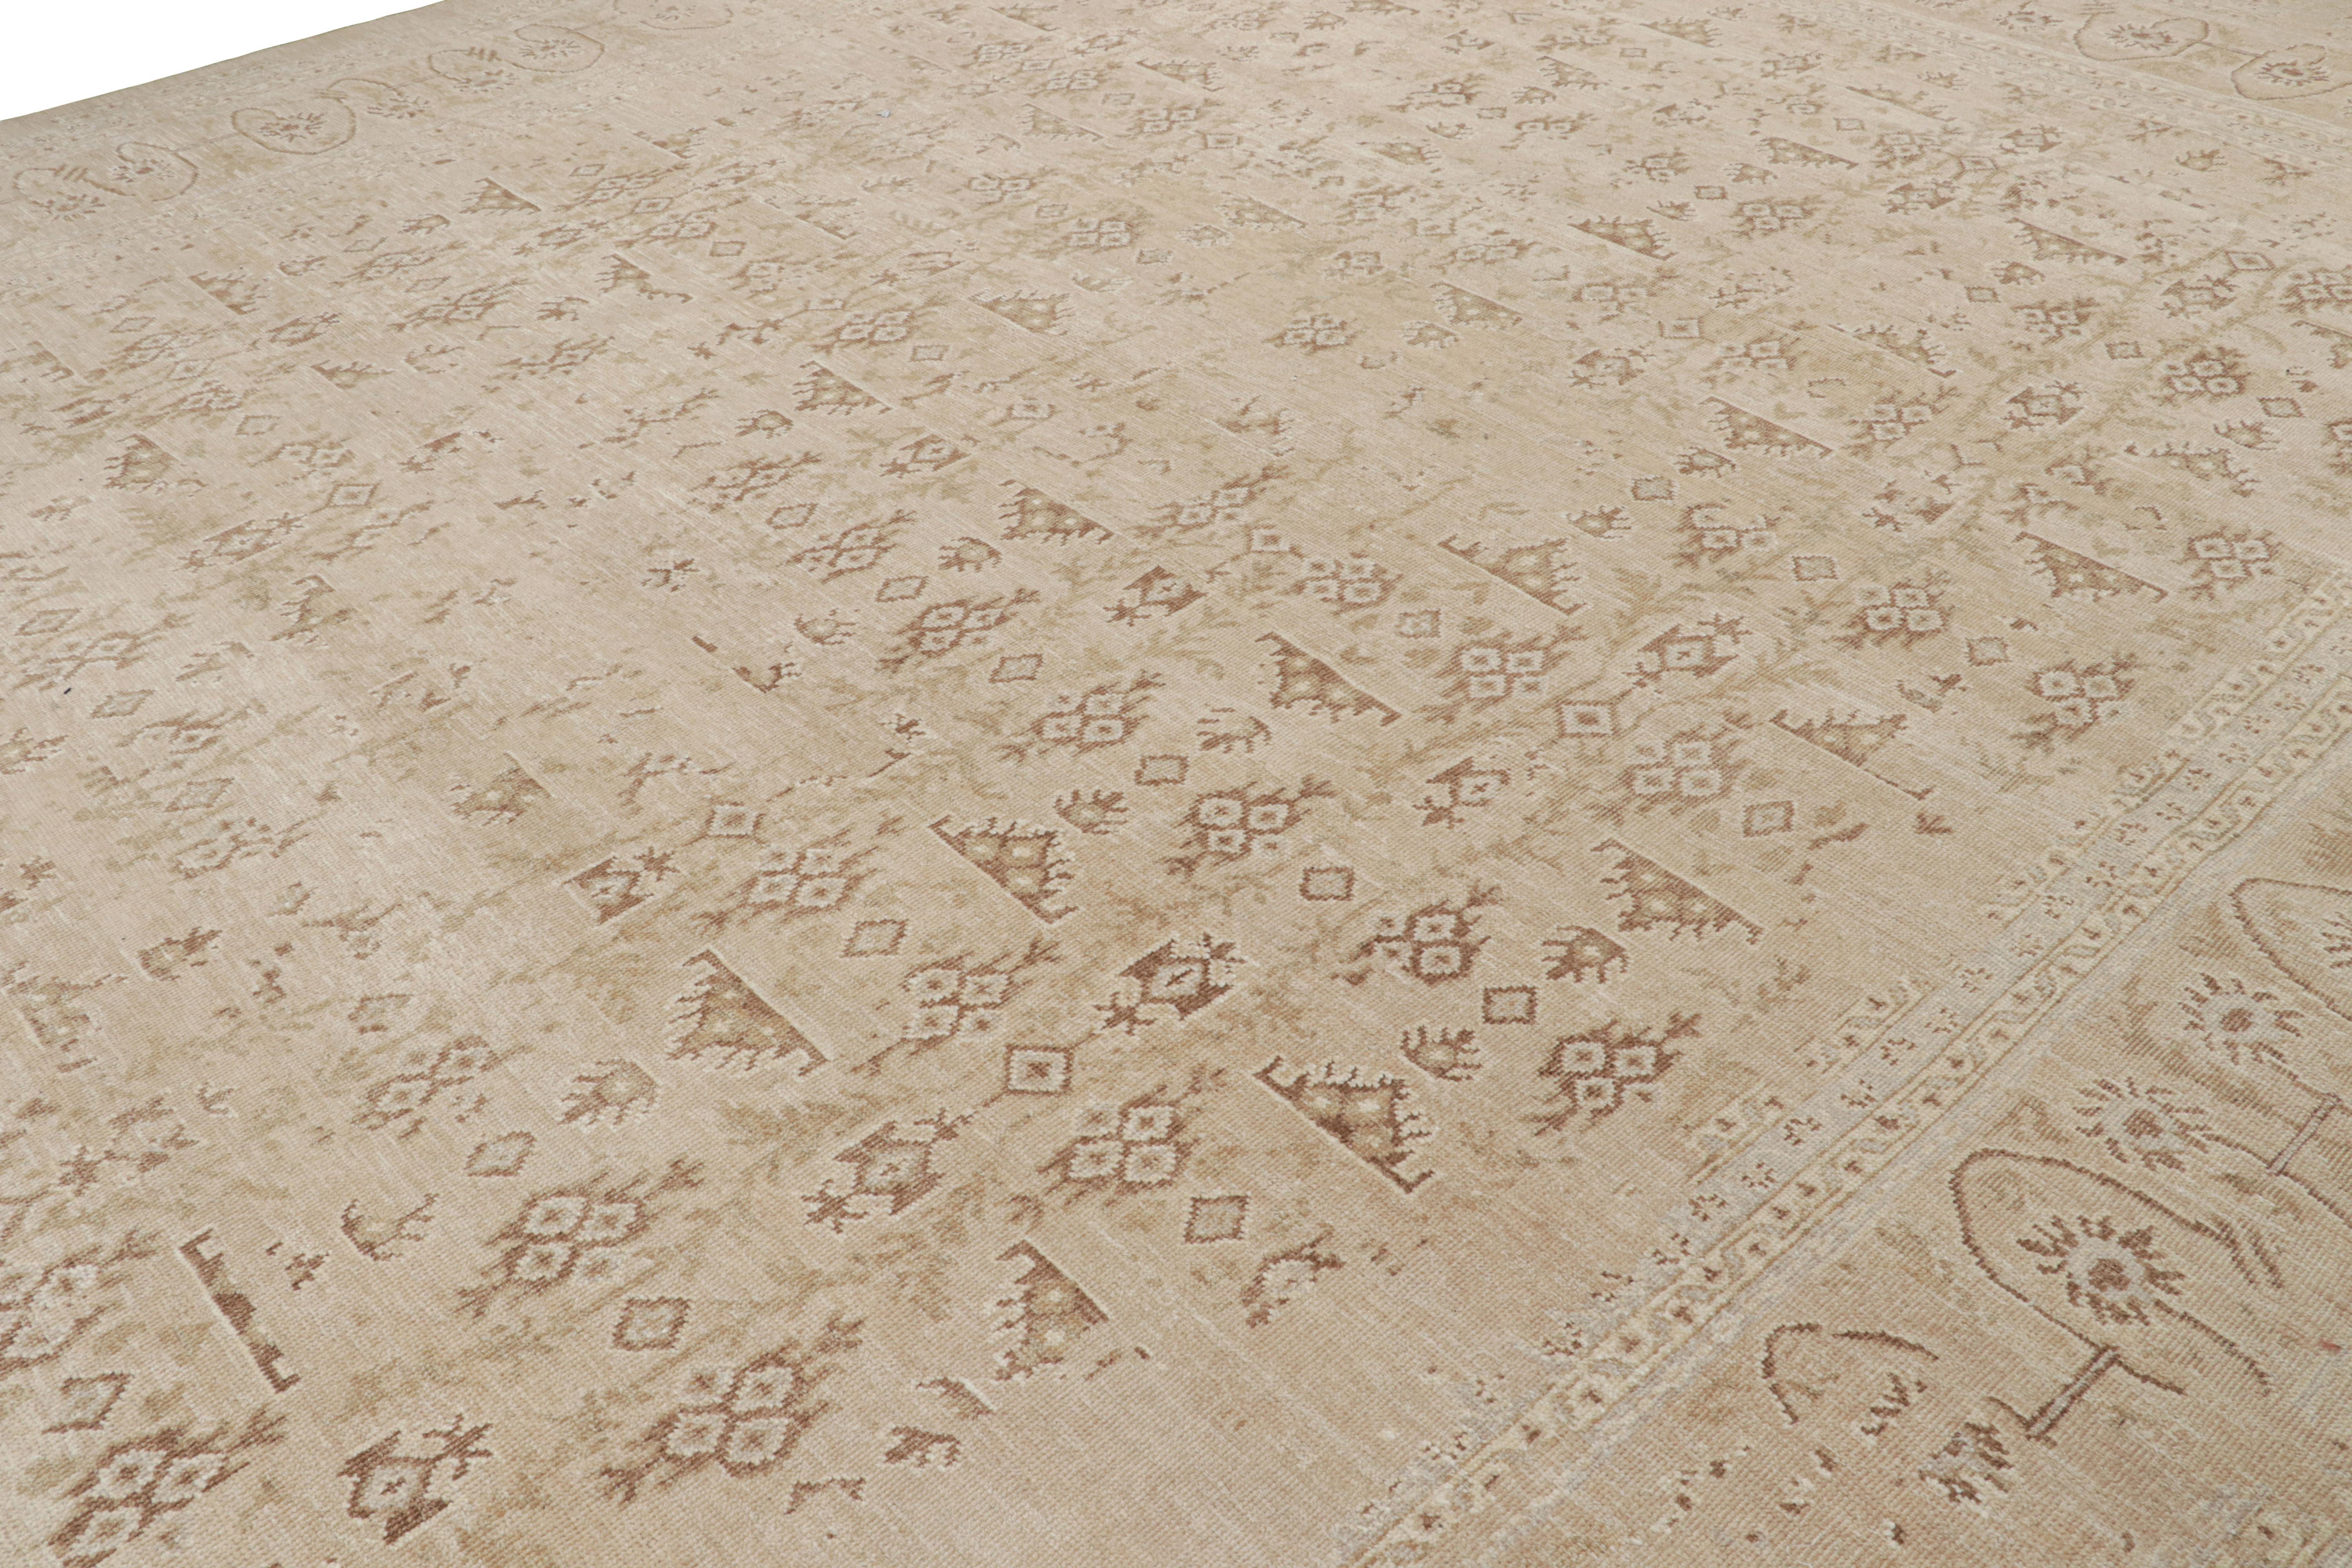 Hand Knotted in wool and silk, this 14x20 oversized rug represents a new approach to antique Oushak rug styles. From Rug & Kilim’s Modern Classics Collection, this design features geometric floral patterns in beige-brown, ivory and light blue